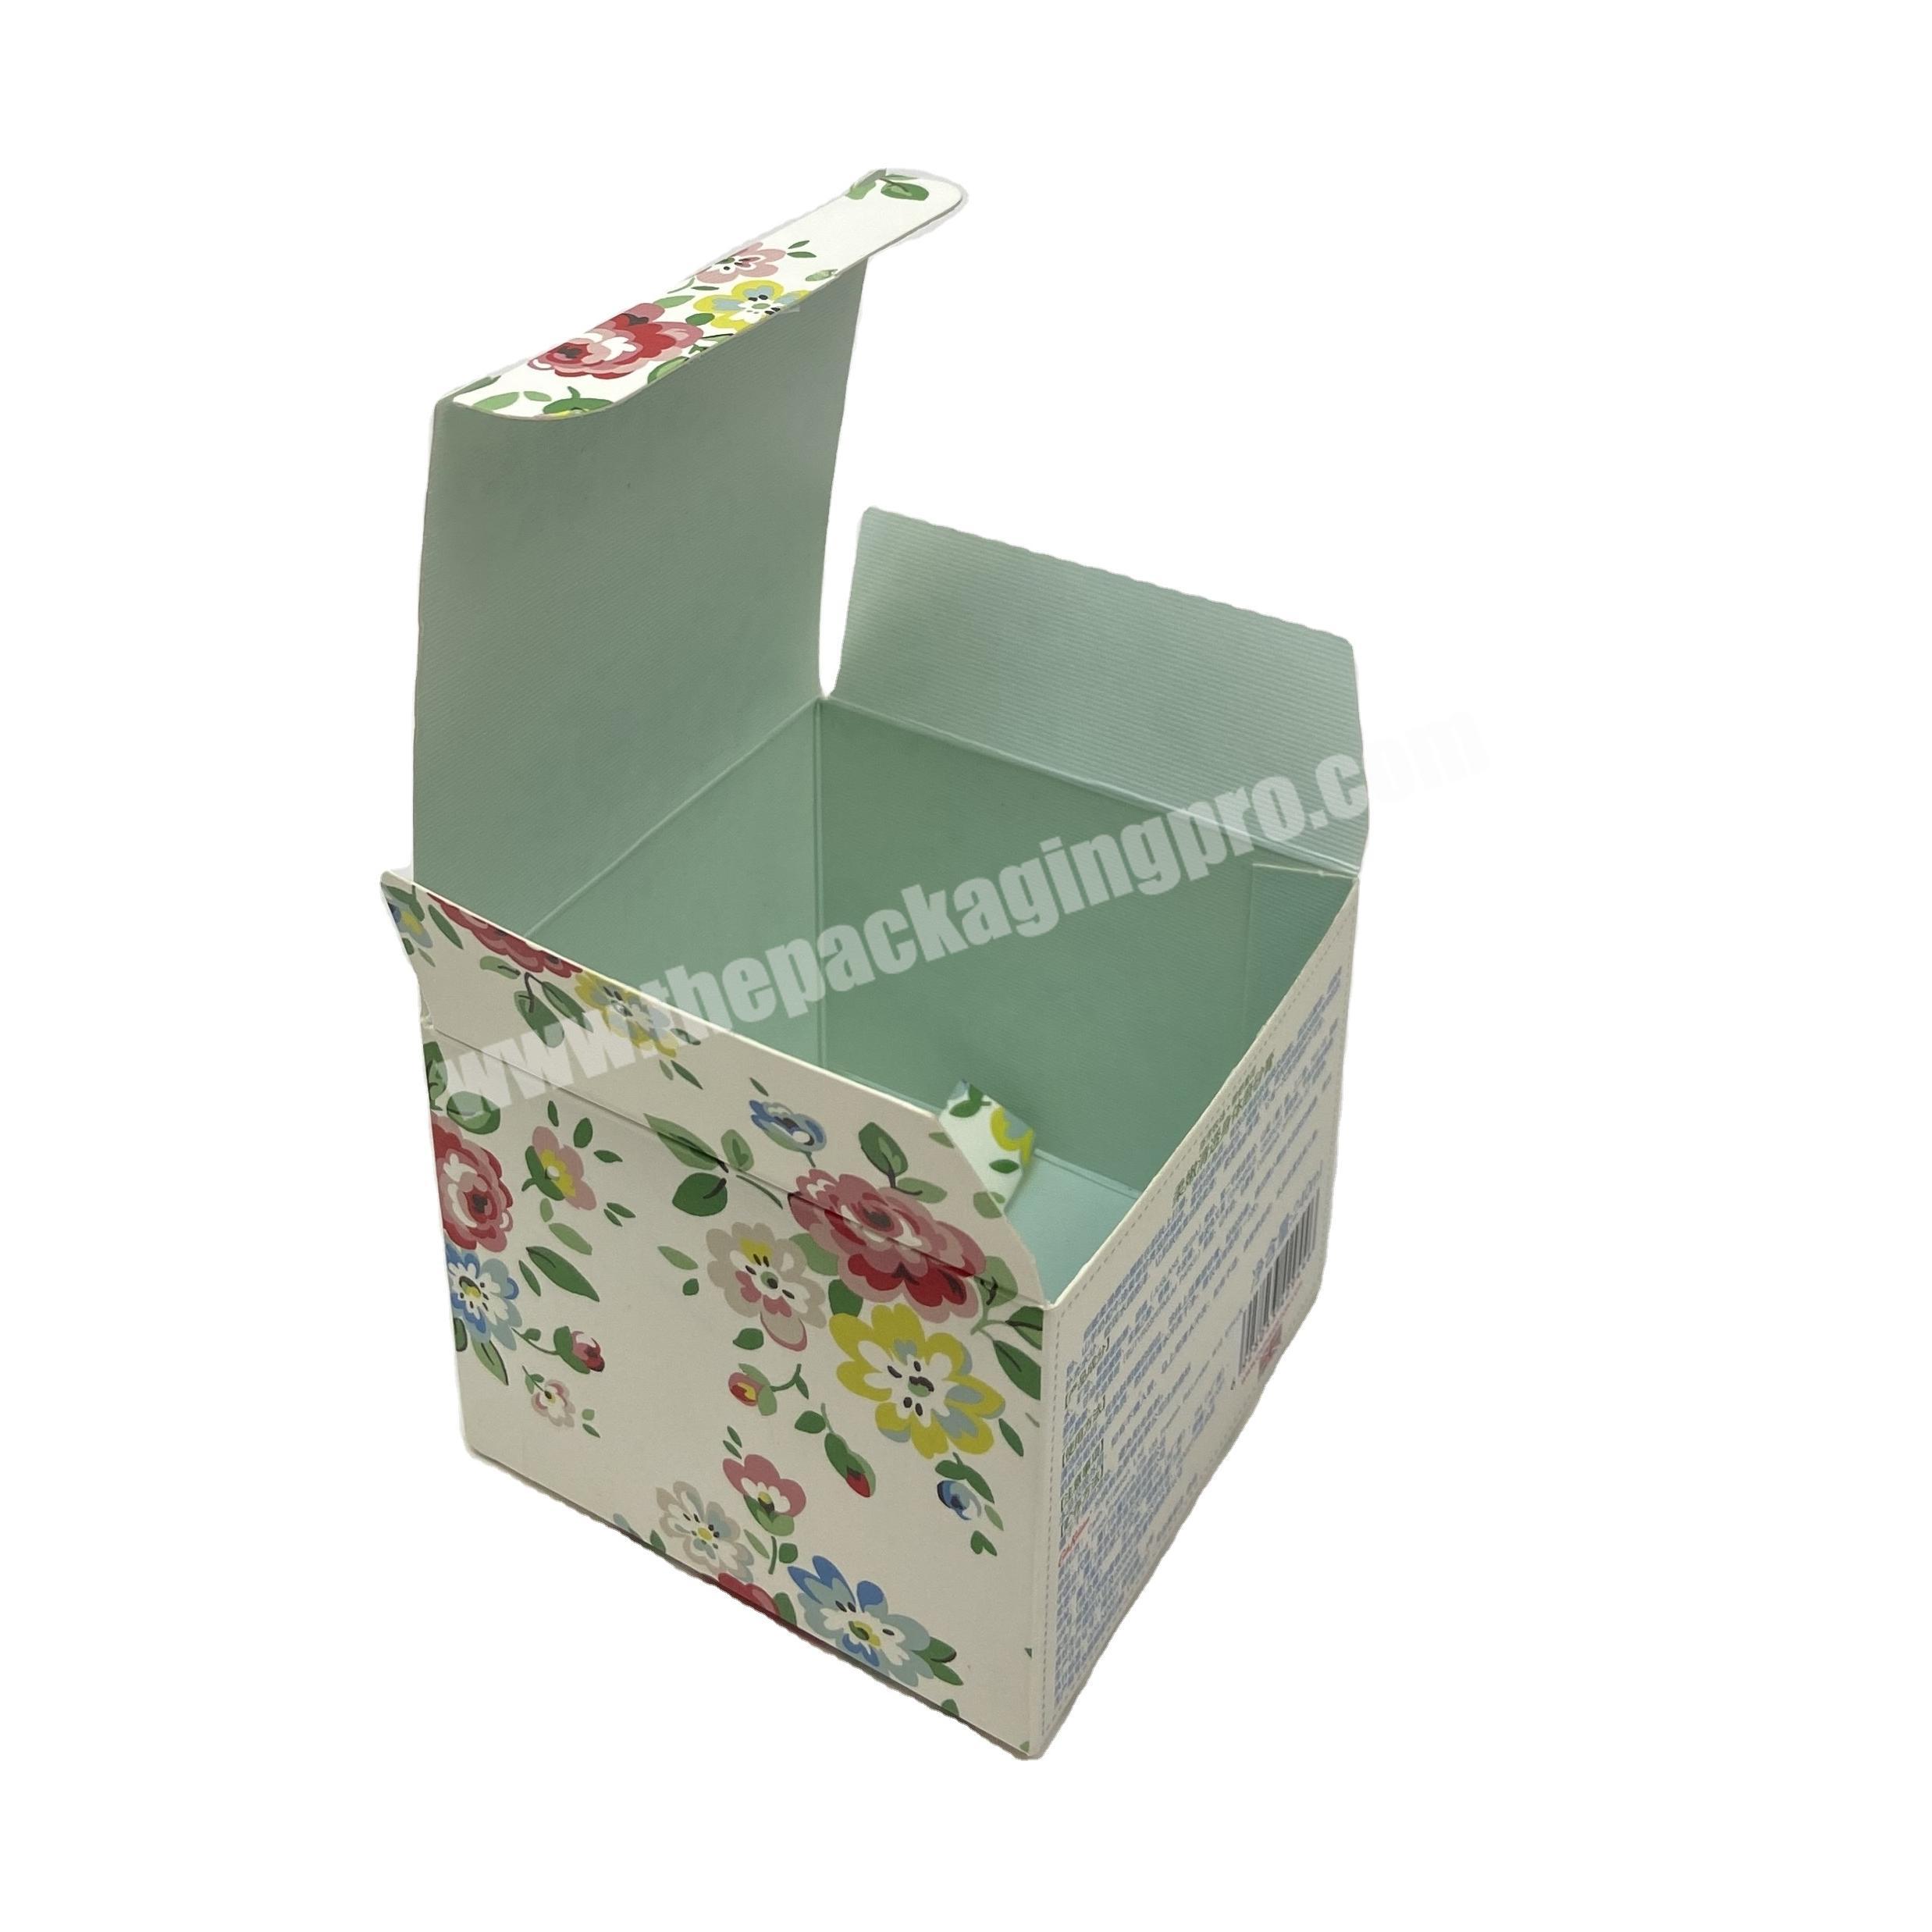 Hot Sale Custom Packaging Boxes Mailer Boxes &Corrugated Paper Boxes